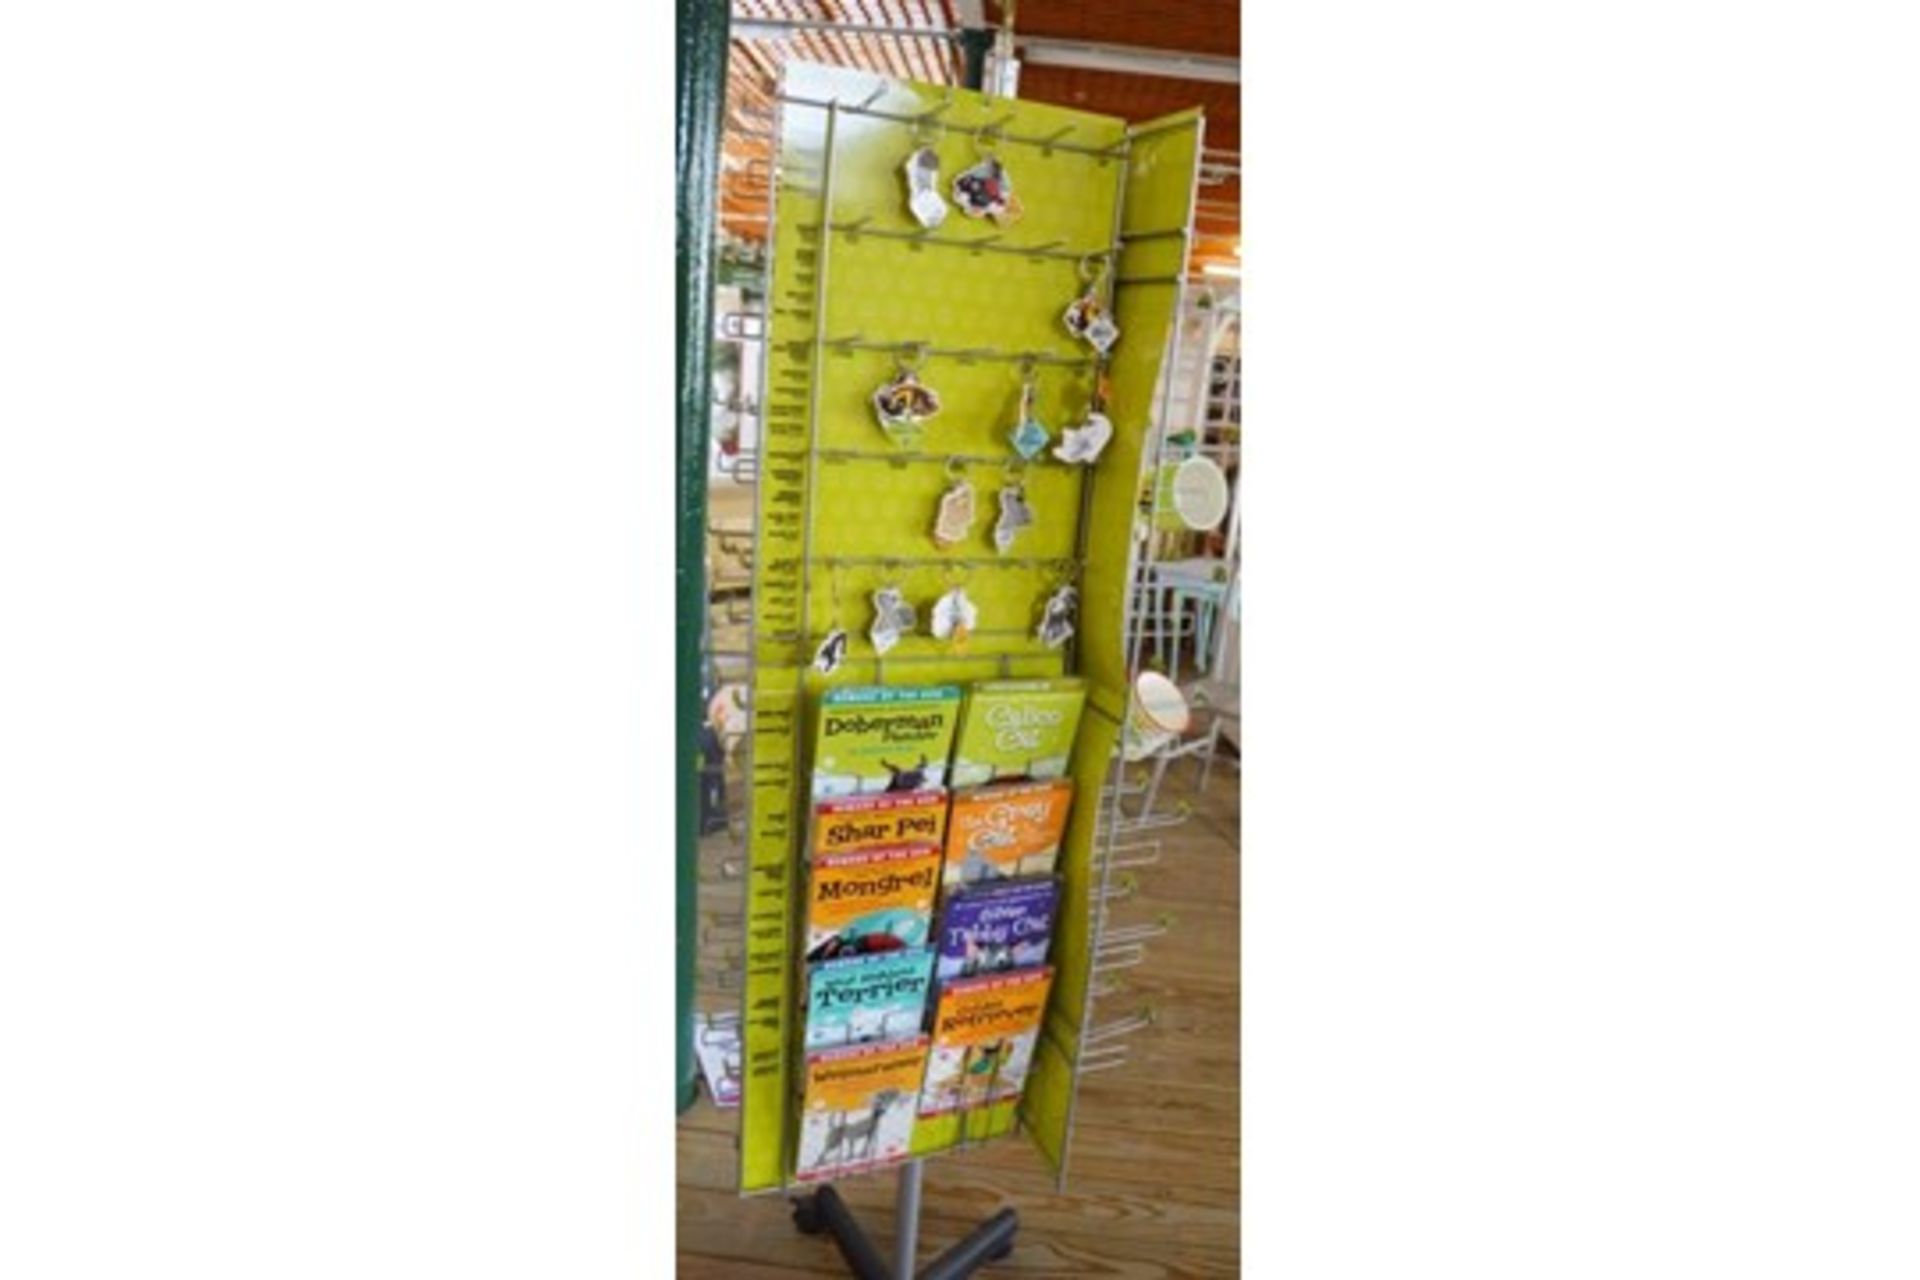 27 x Retail Carousel Display Stands With Approximately 2,800 Items of Resale Stock - Includes - Image 10 of 61